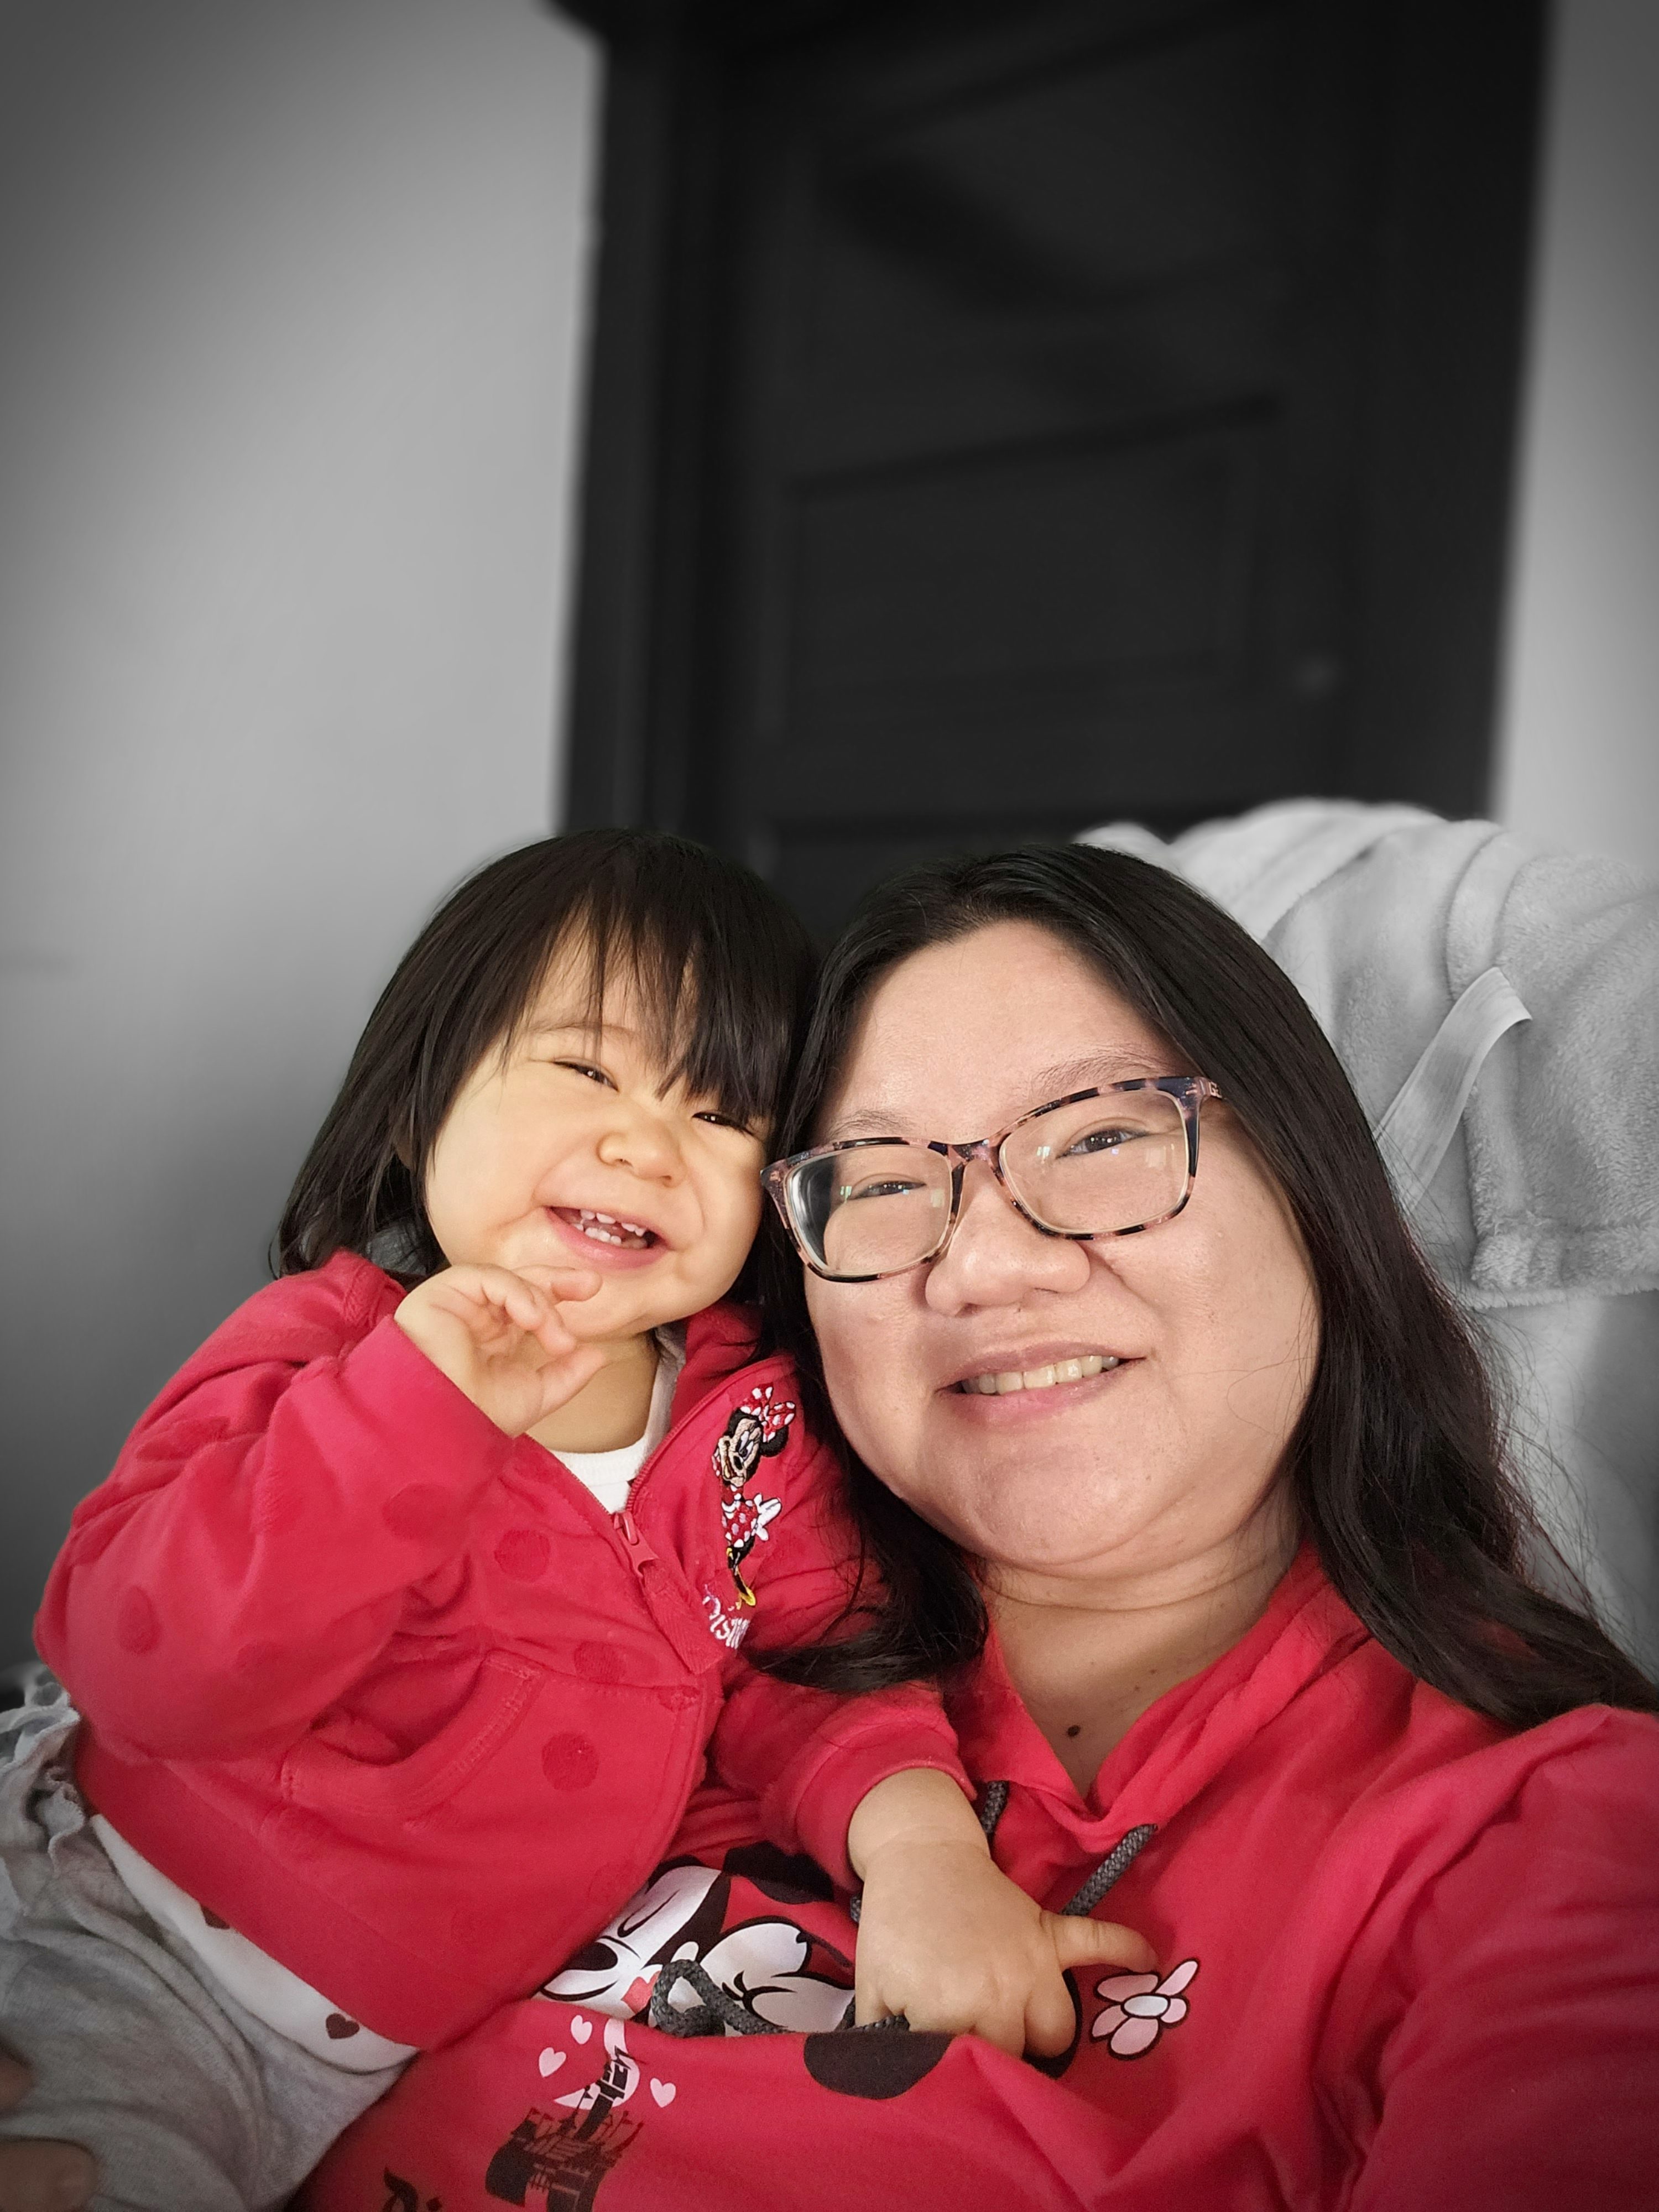 Selfie of Christine and daughter with Color Pop applied